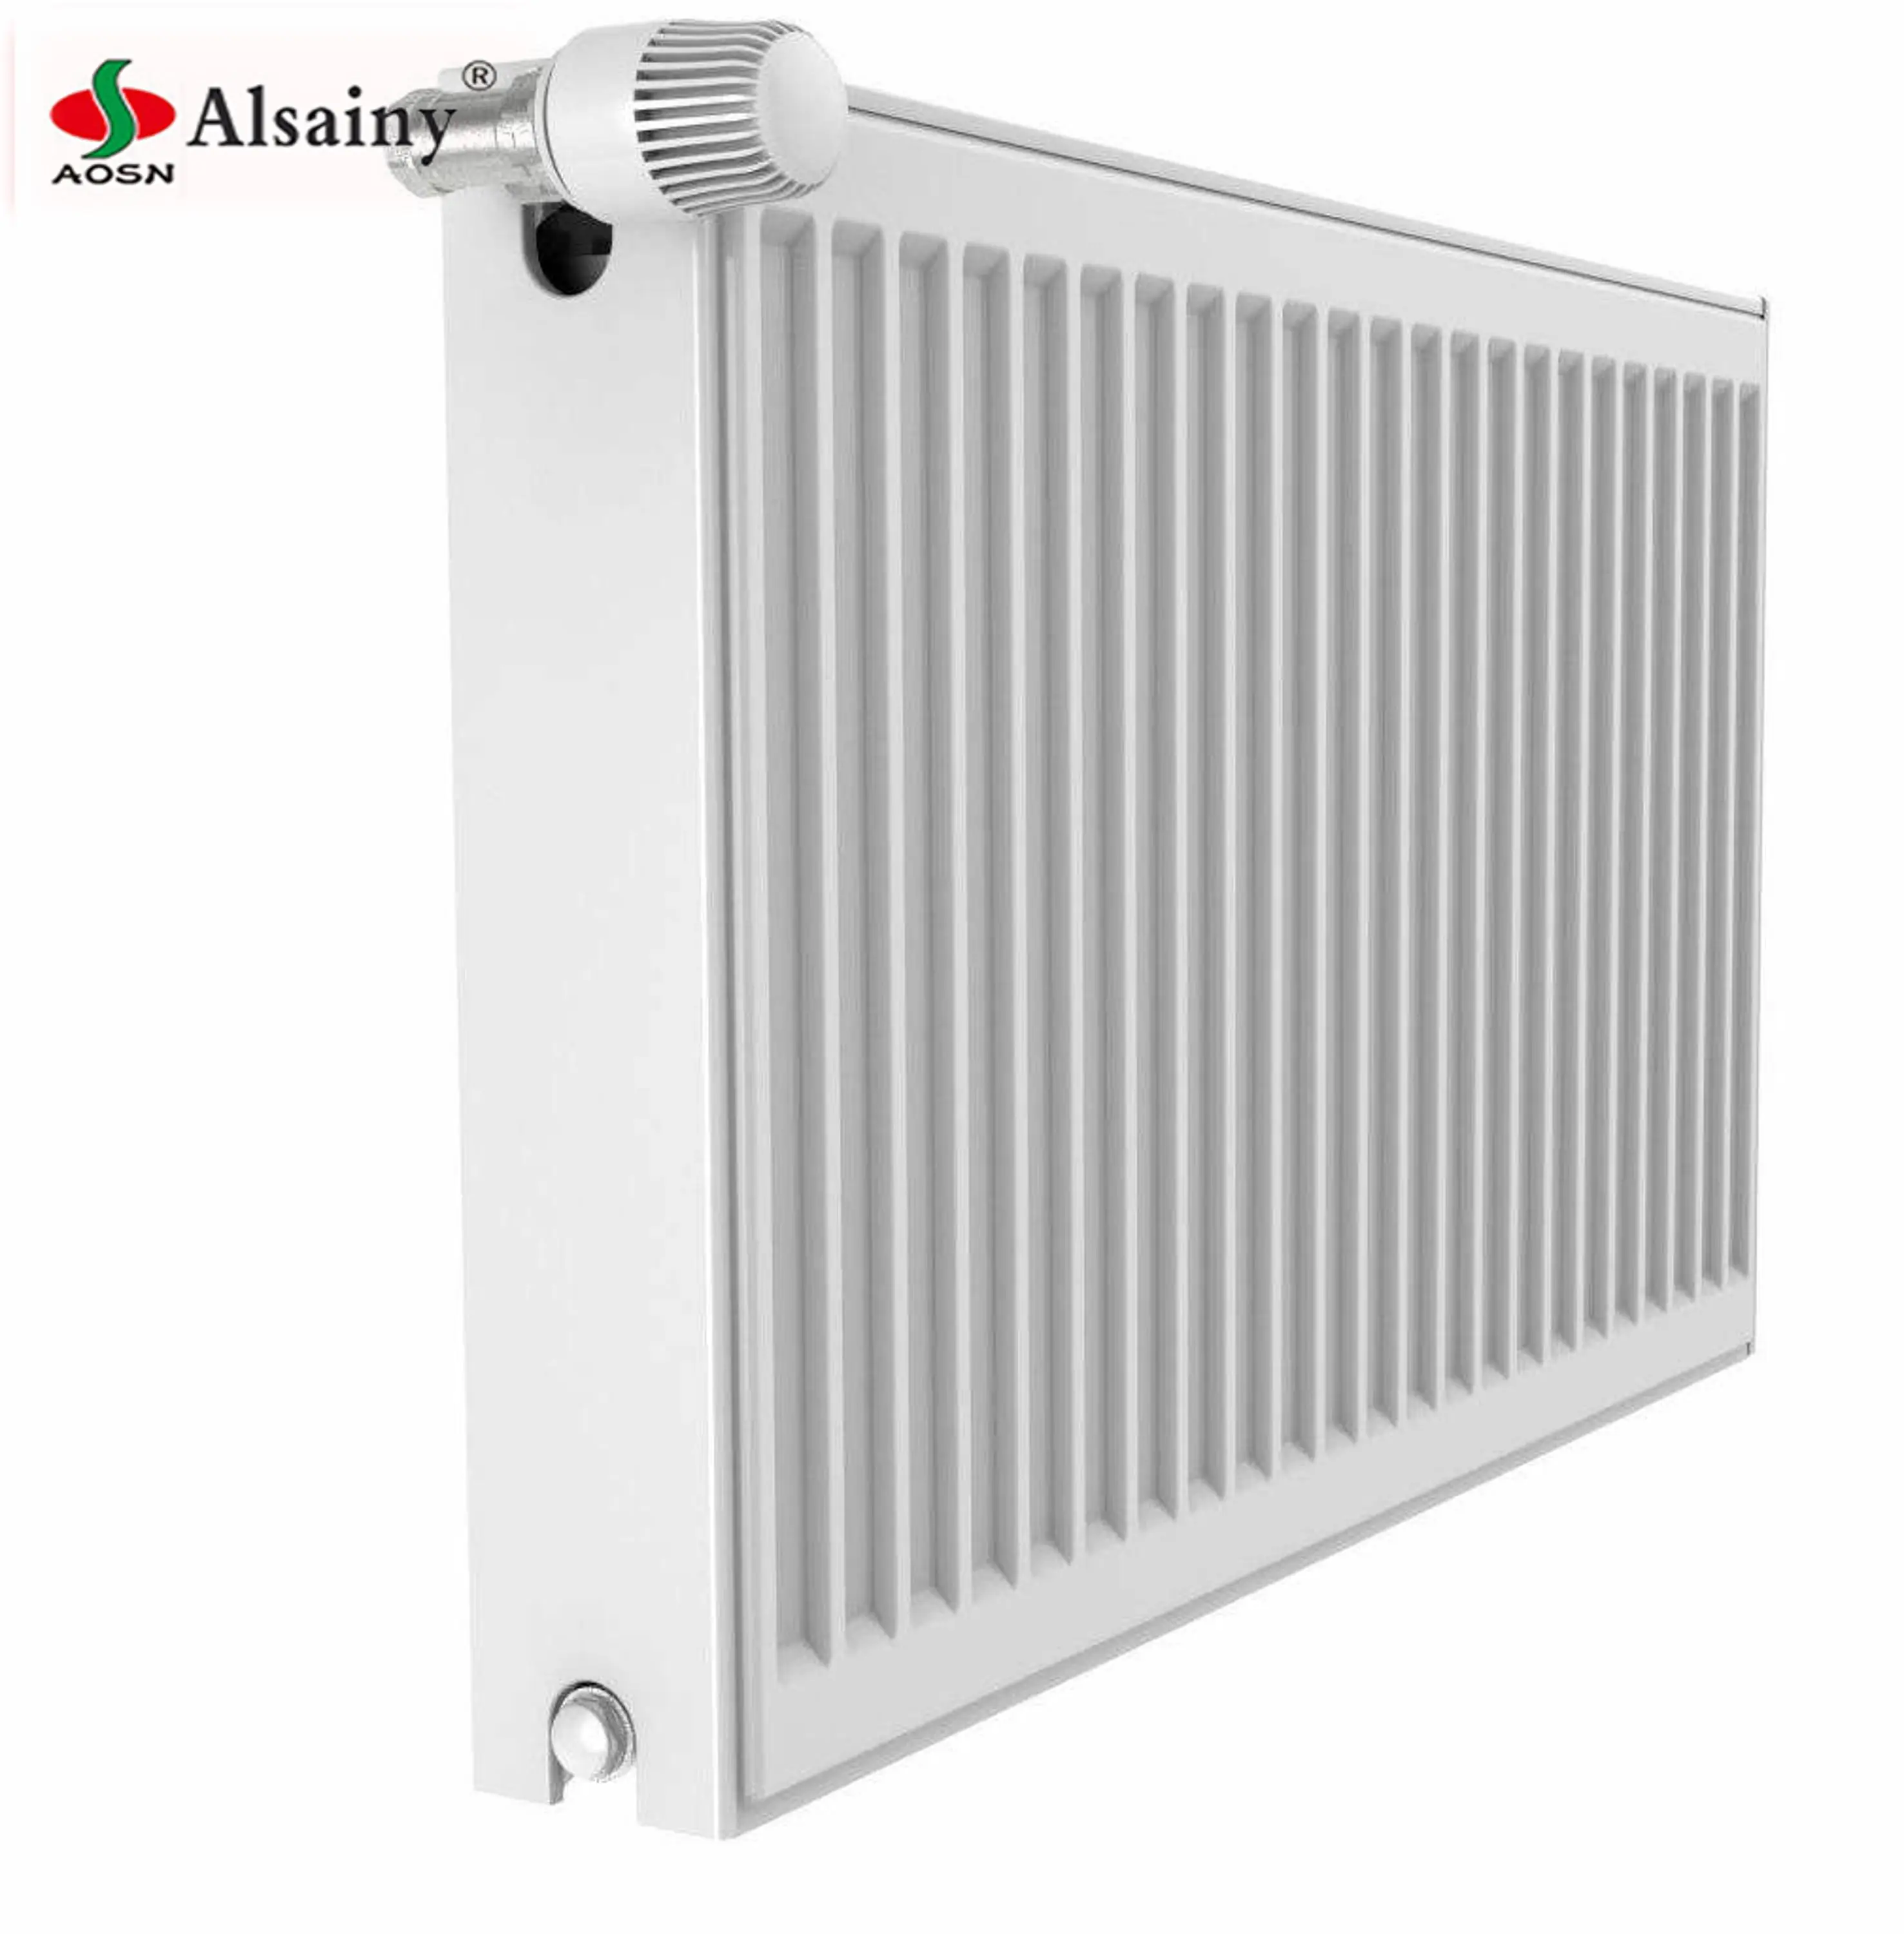 Stewart Island zonde Middel China Produces Quality,Standard And Diversified Steel Plate Radiators Water  Radiator - Buy Steel Plate Type Radiator,Steel Radiator,High Quality  Radiator Product on Alibaba.com